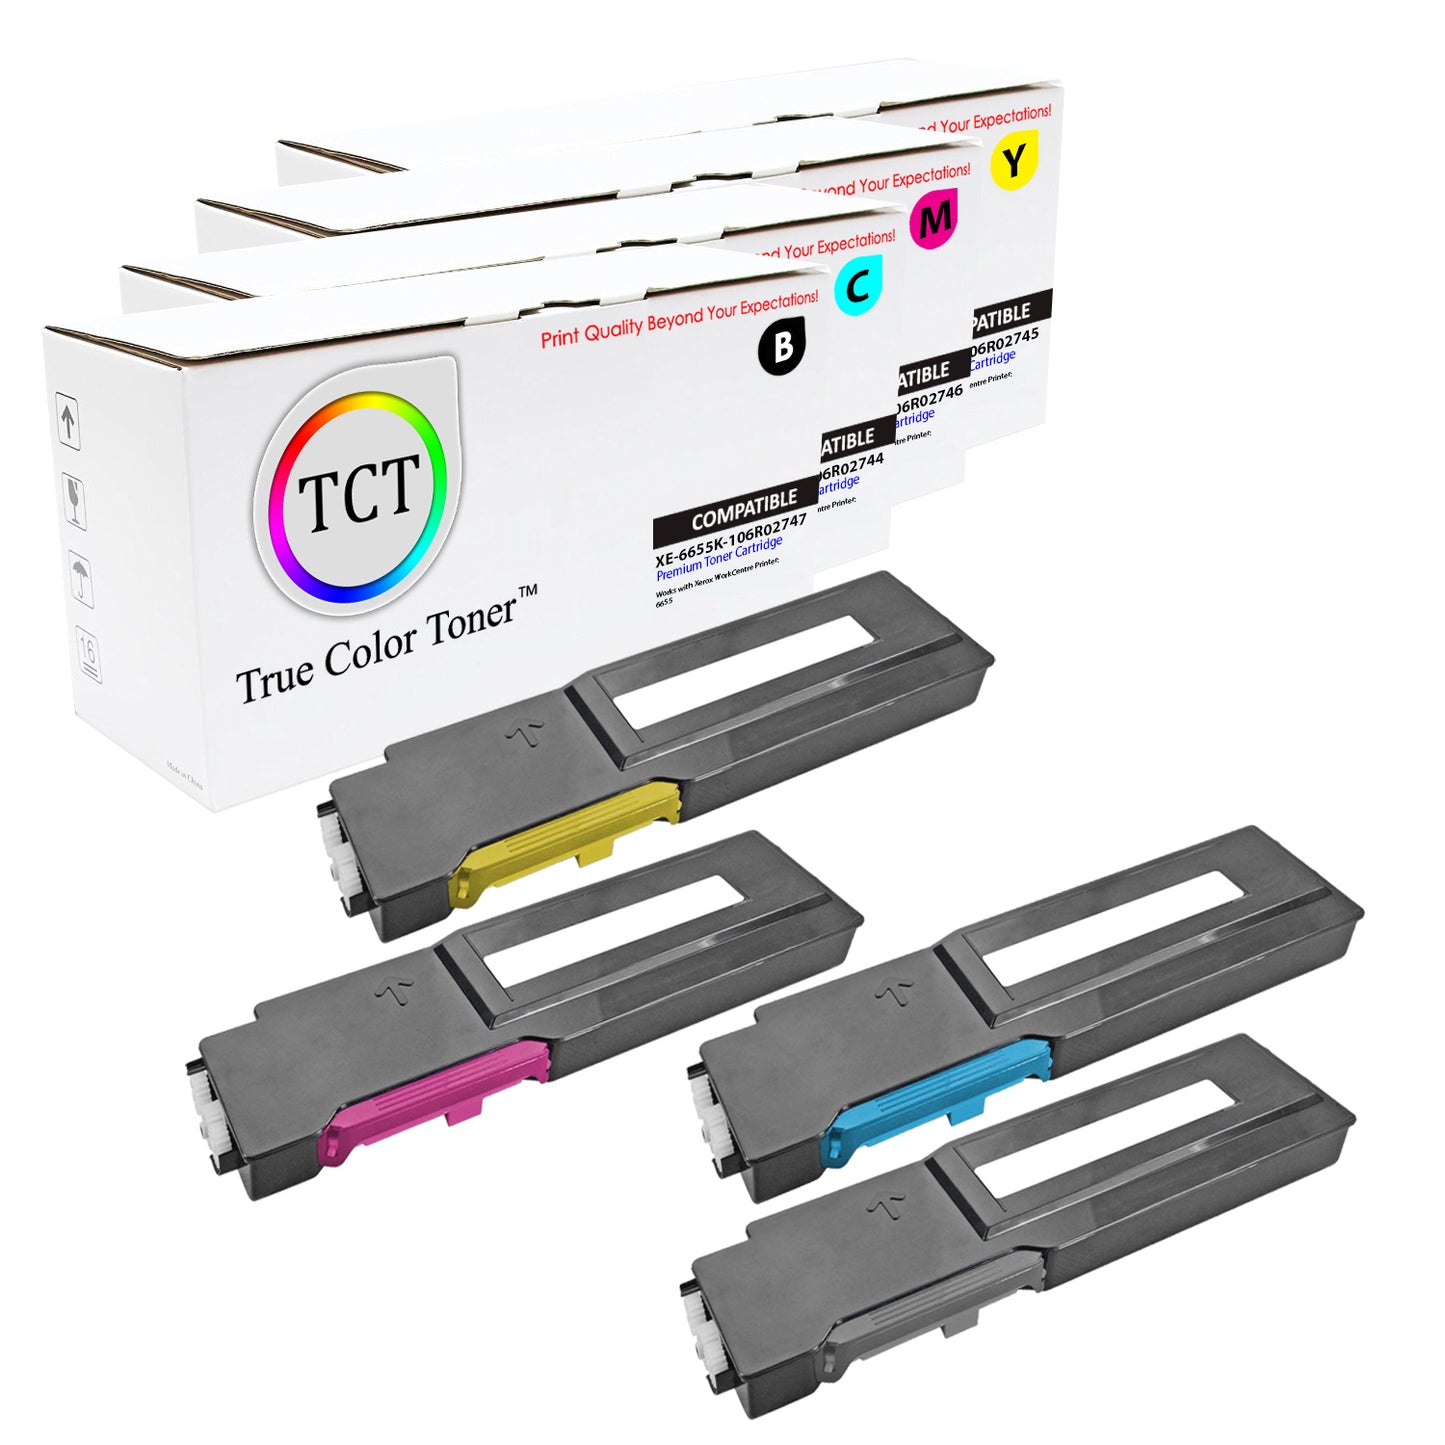 TCT Compatible Toner Cartridge Replacement for the Xerox 6655 Series - 4 Pack (BK, C, M, Y)